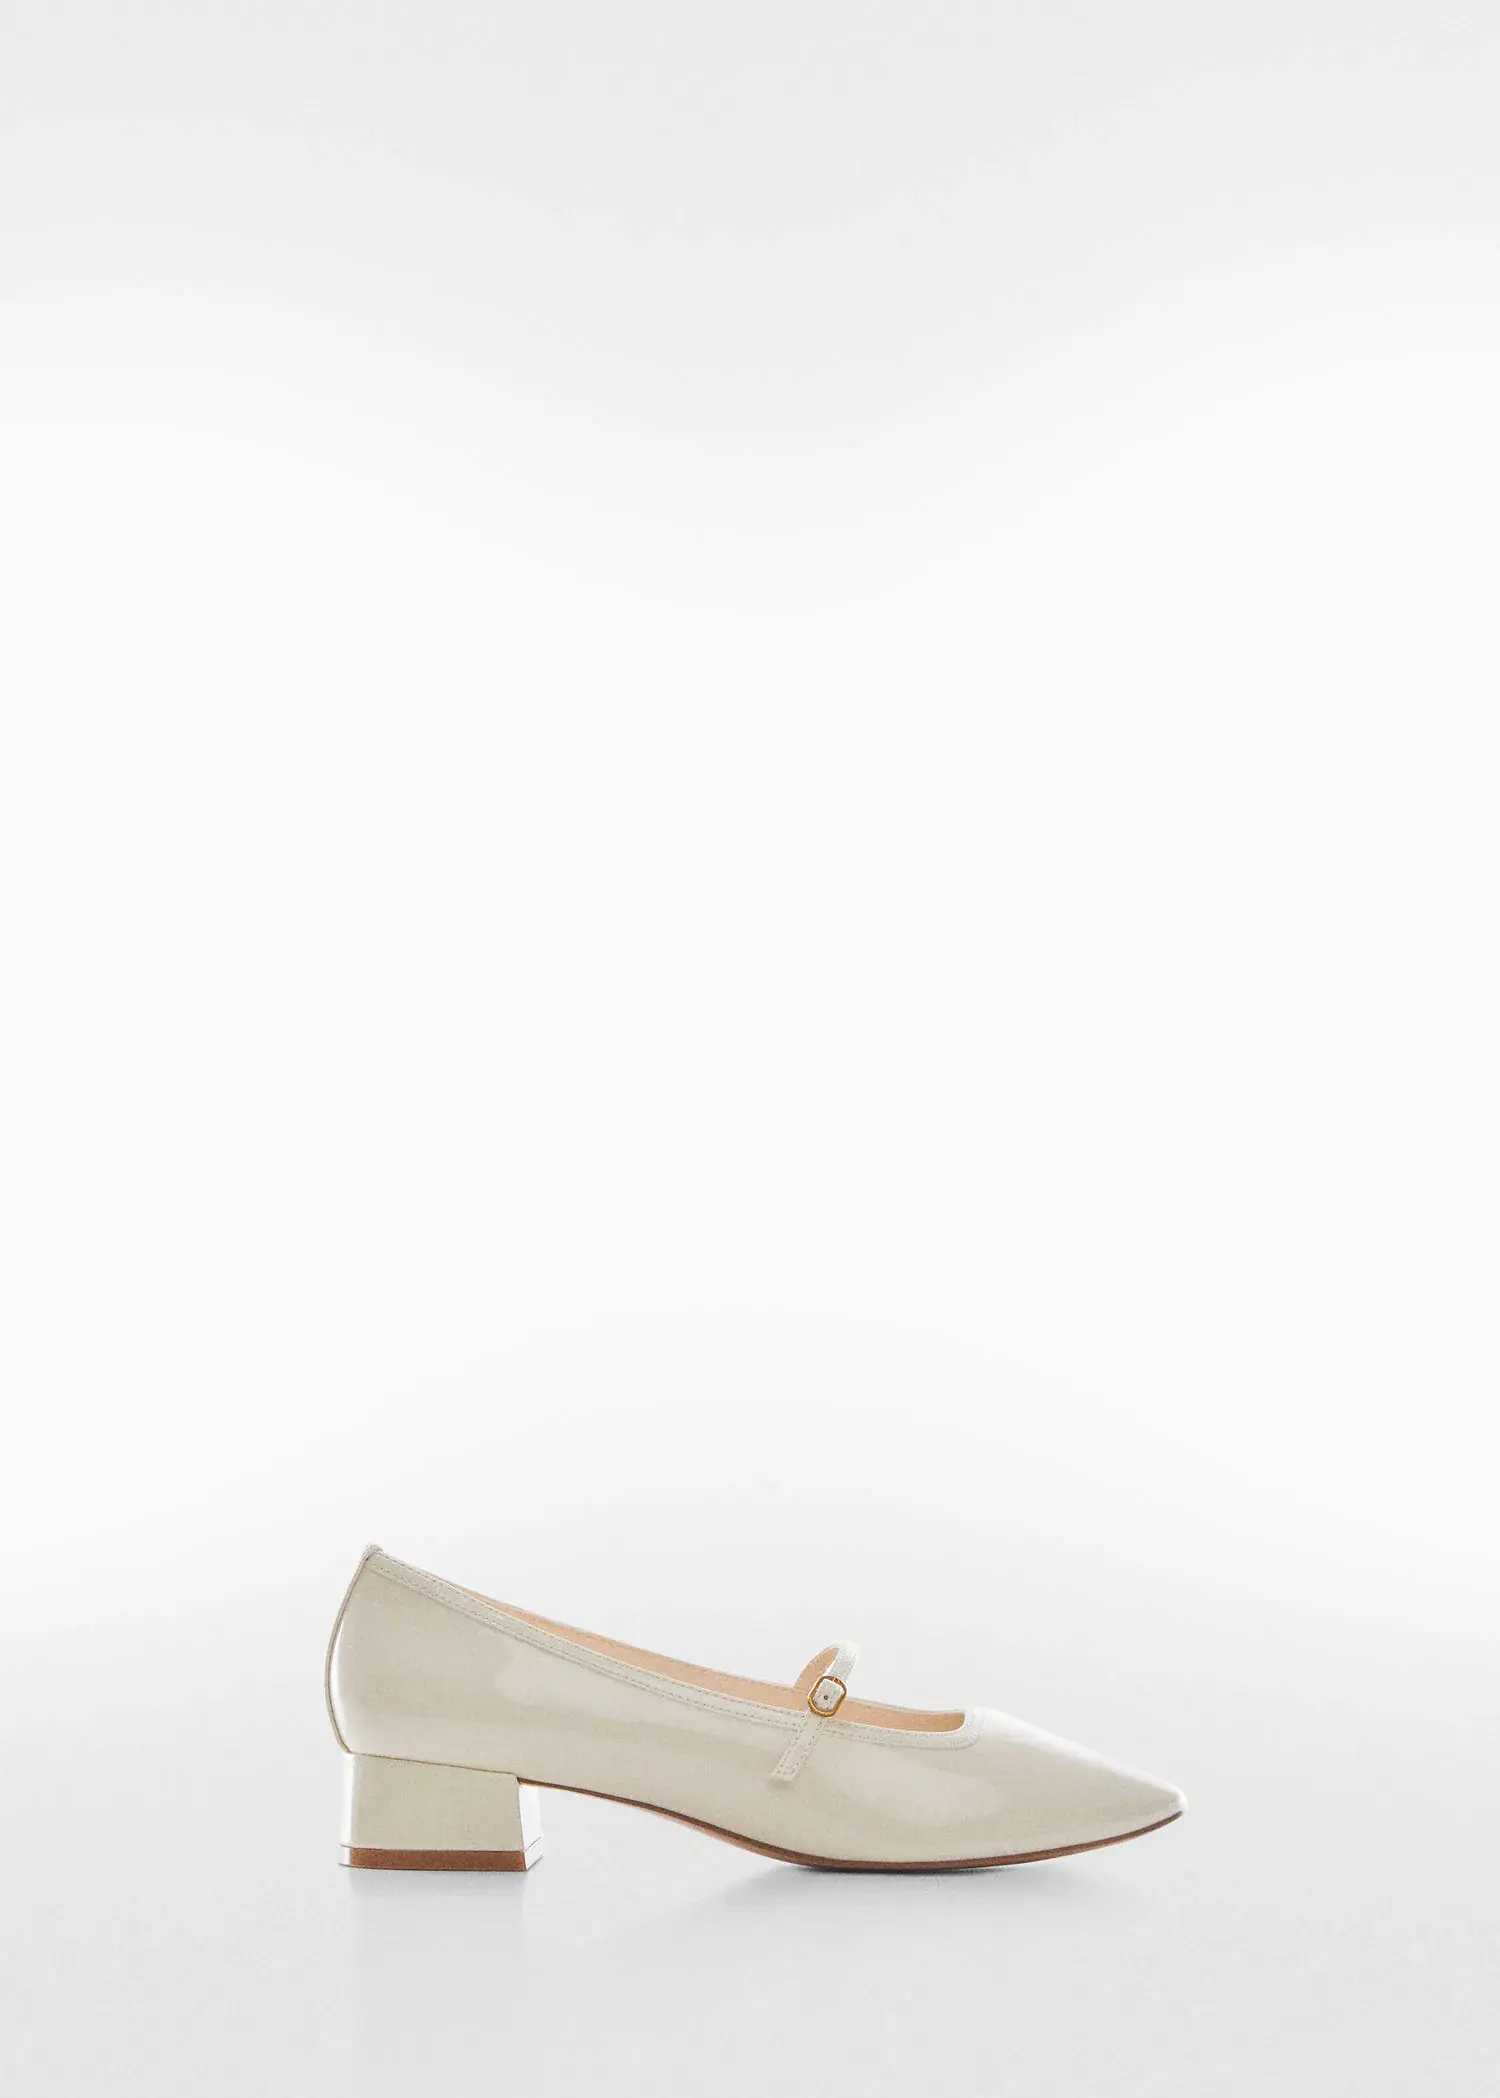 Mango Heeled shoes with buckle. a pair of white shoes on a white background. 